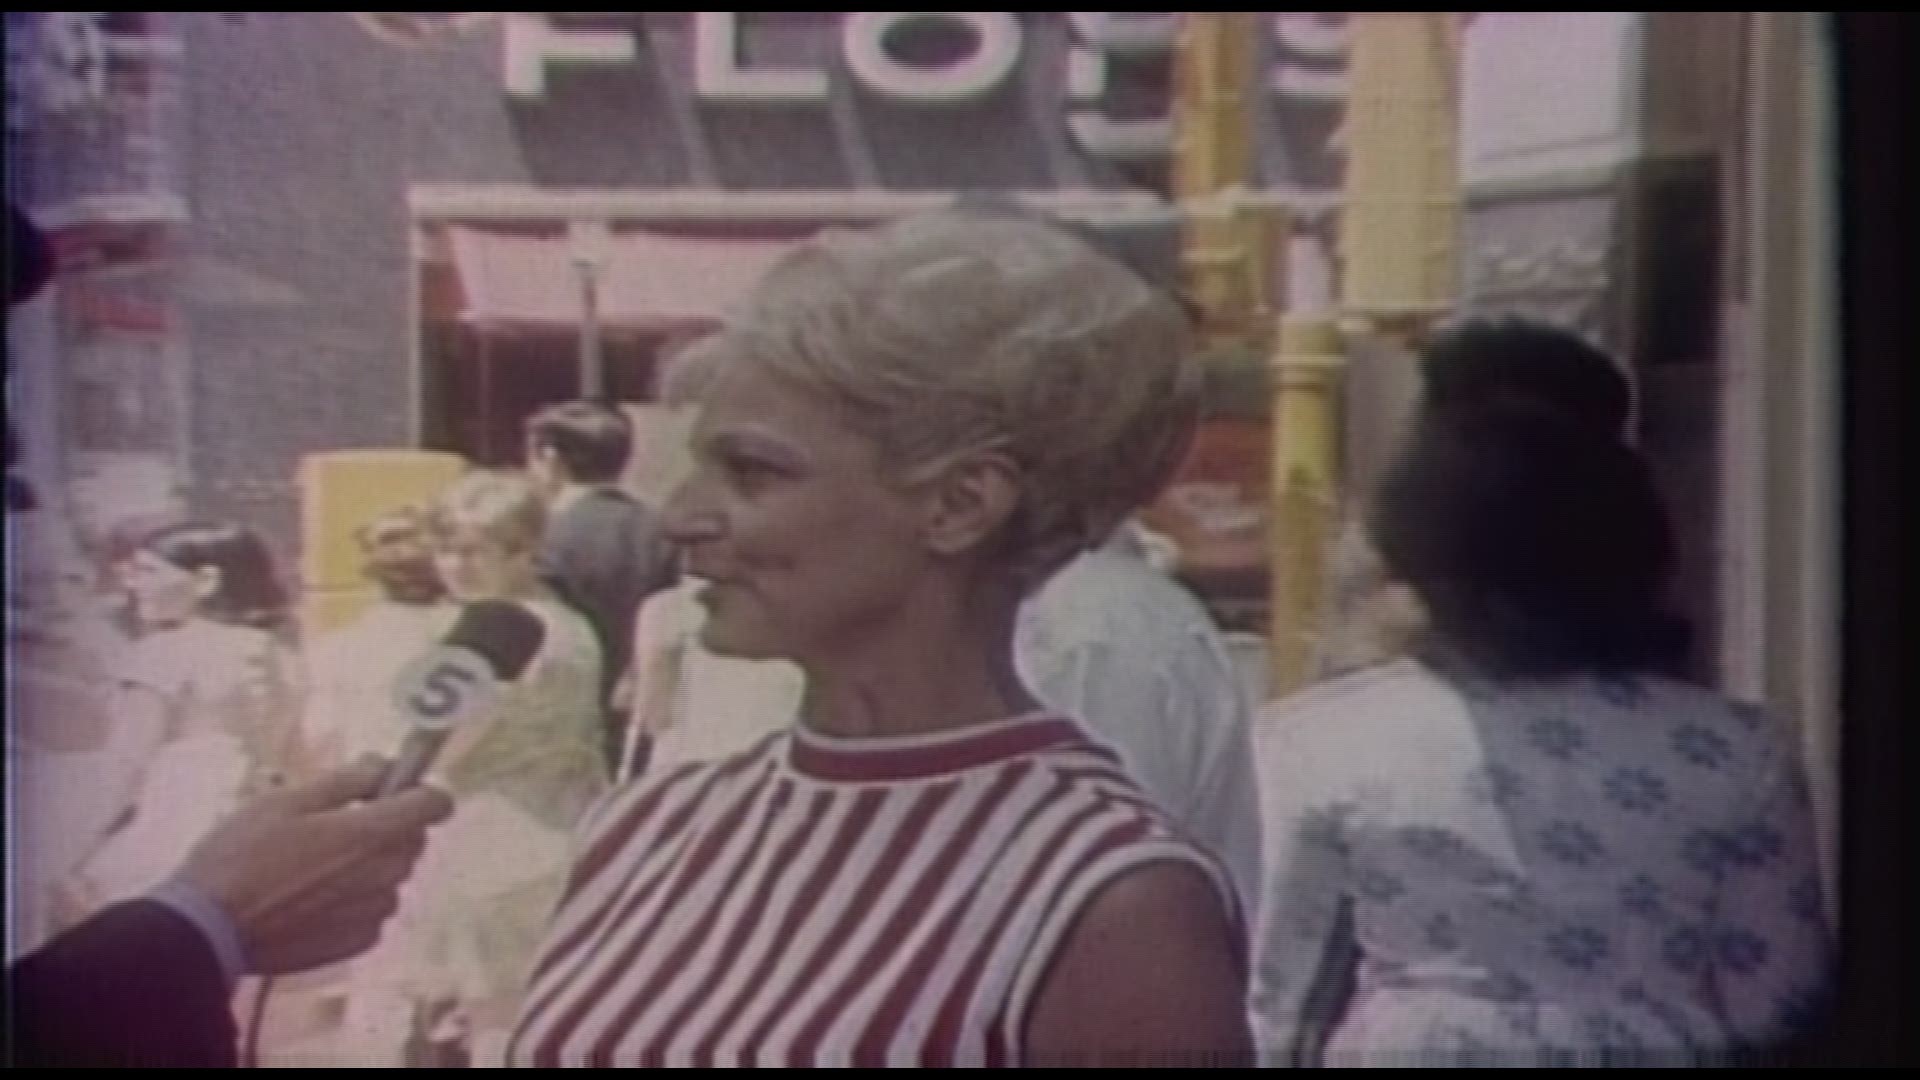 This KSDK video from 1969 shows St. Louisans reacting to the mission that put a man on the moon.